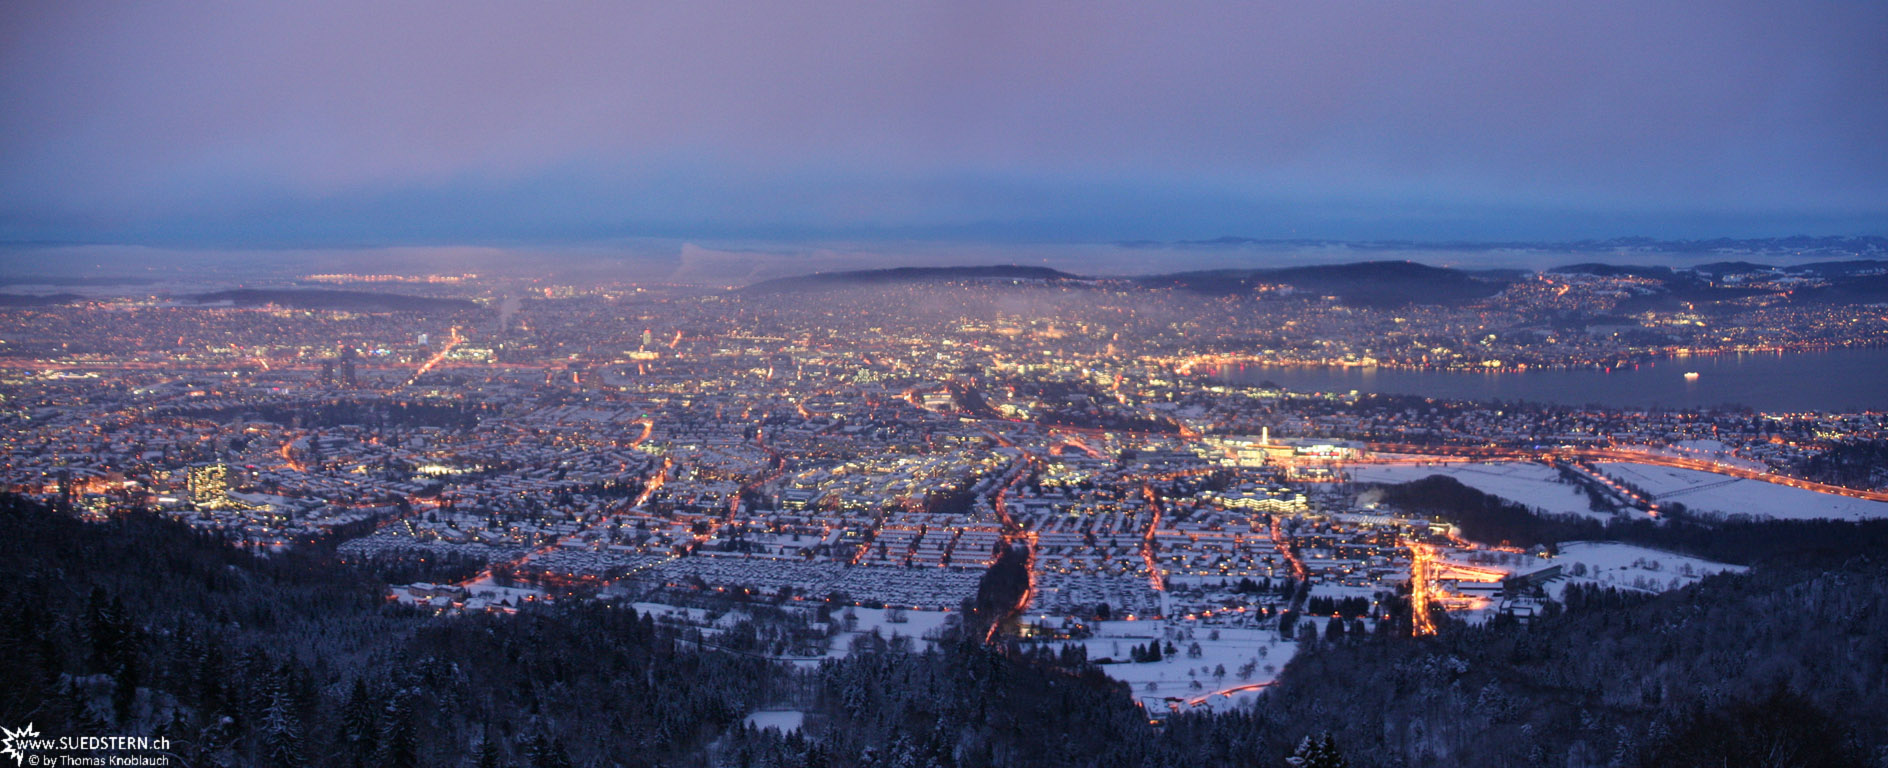 Panorama of Zuerich at the beginning of a winters night